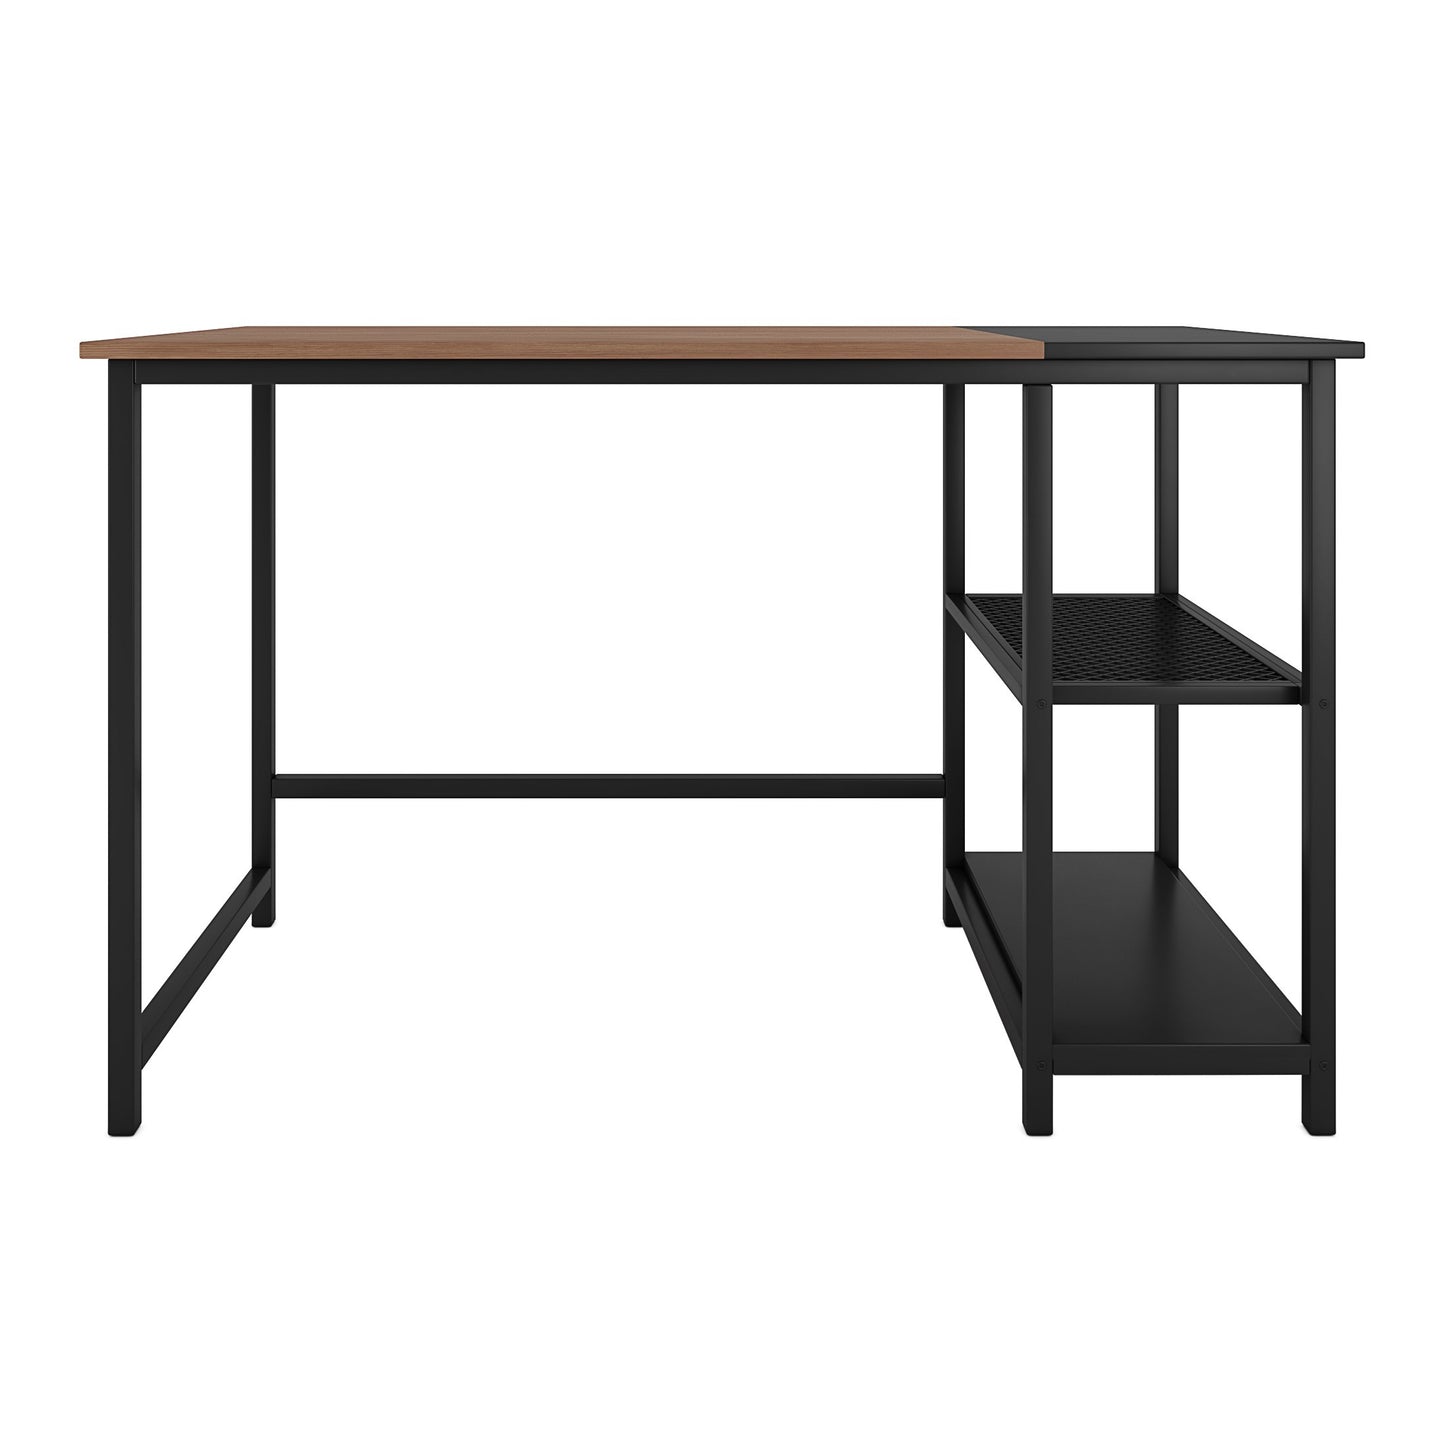 Nancy's Westminster Desk - Computer table - Office table - Storage space - Mouse pad - Engineered Wood - Powder-coated Steel - Black Brown - 120 x 60 x 75 cm